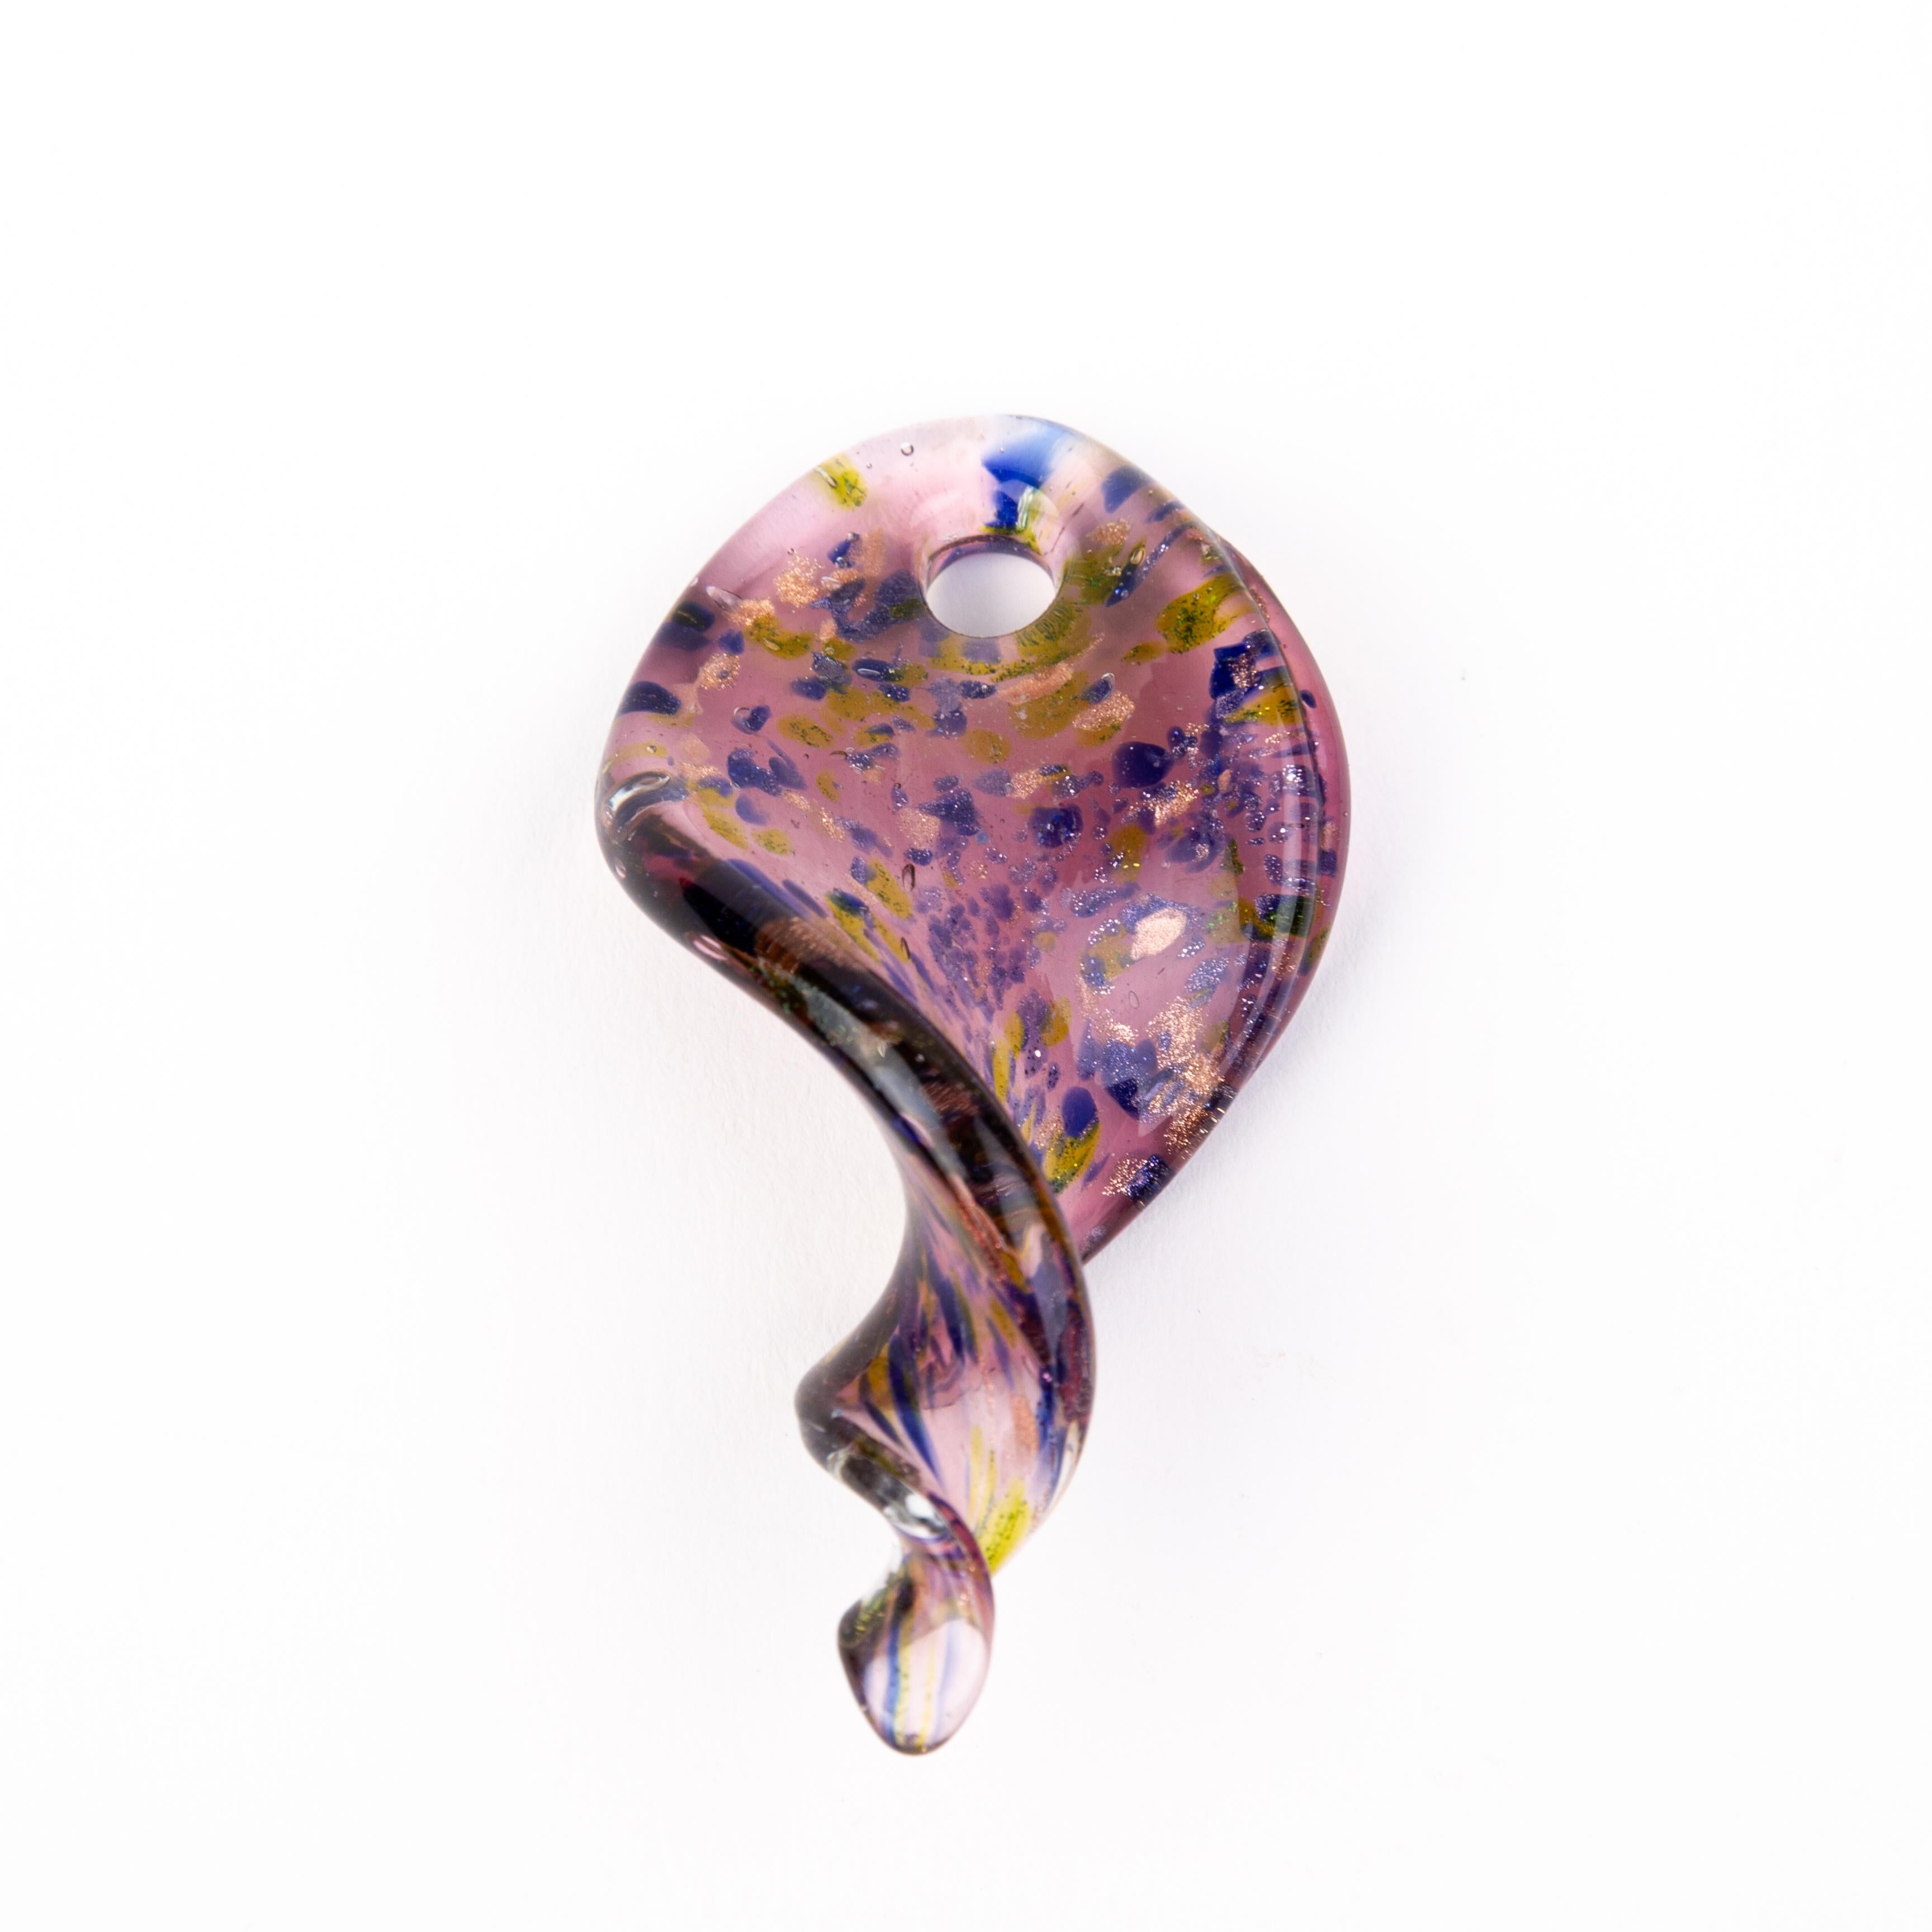 In good condition
From a private collection
Free international shipping
Murano Venetian Glass Designer Pendant